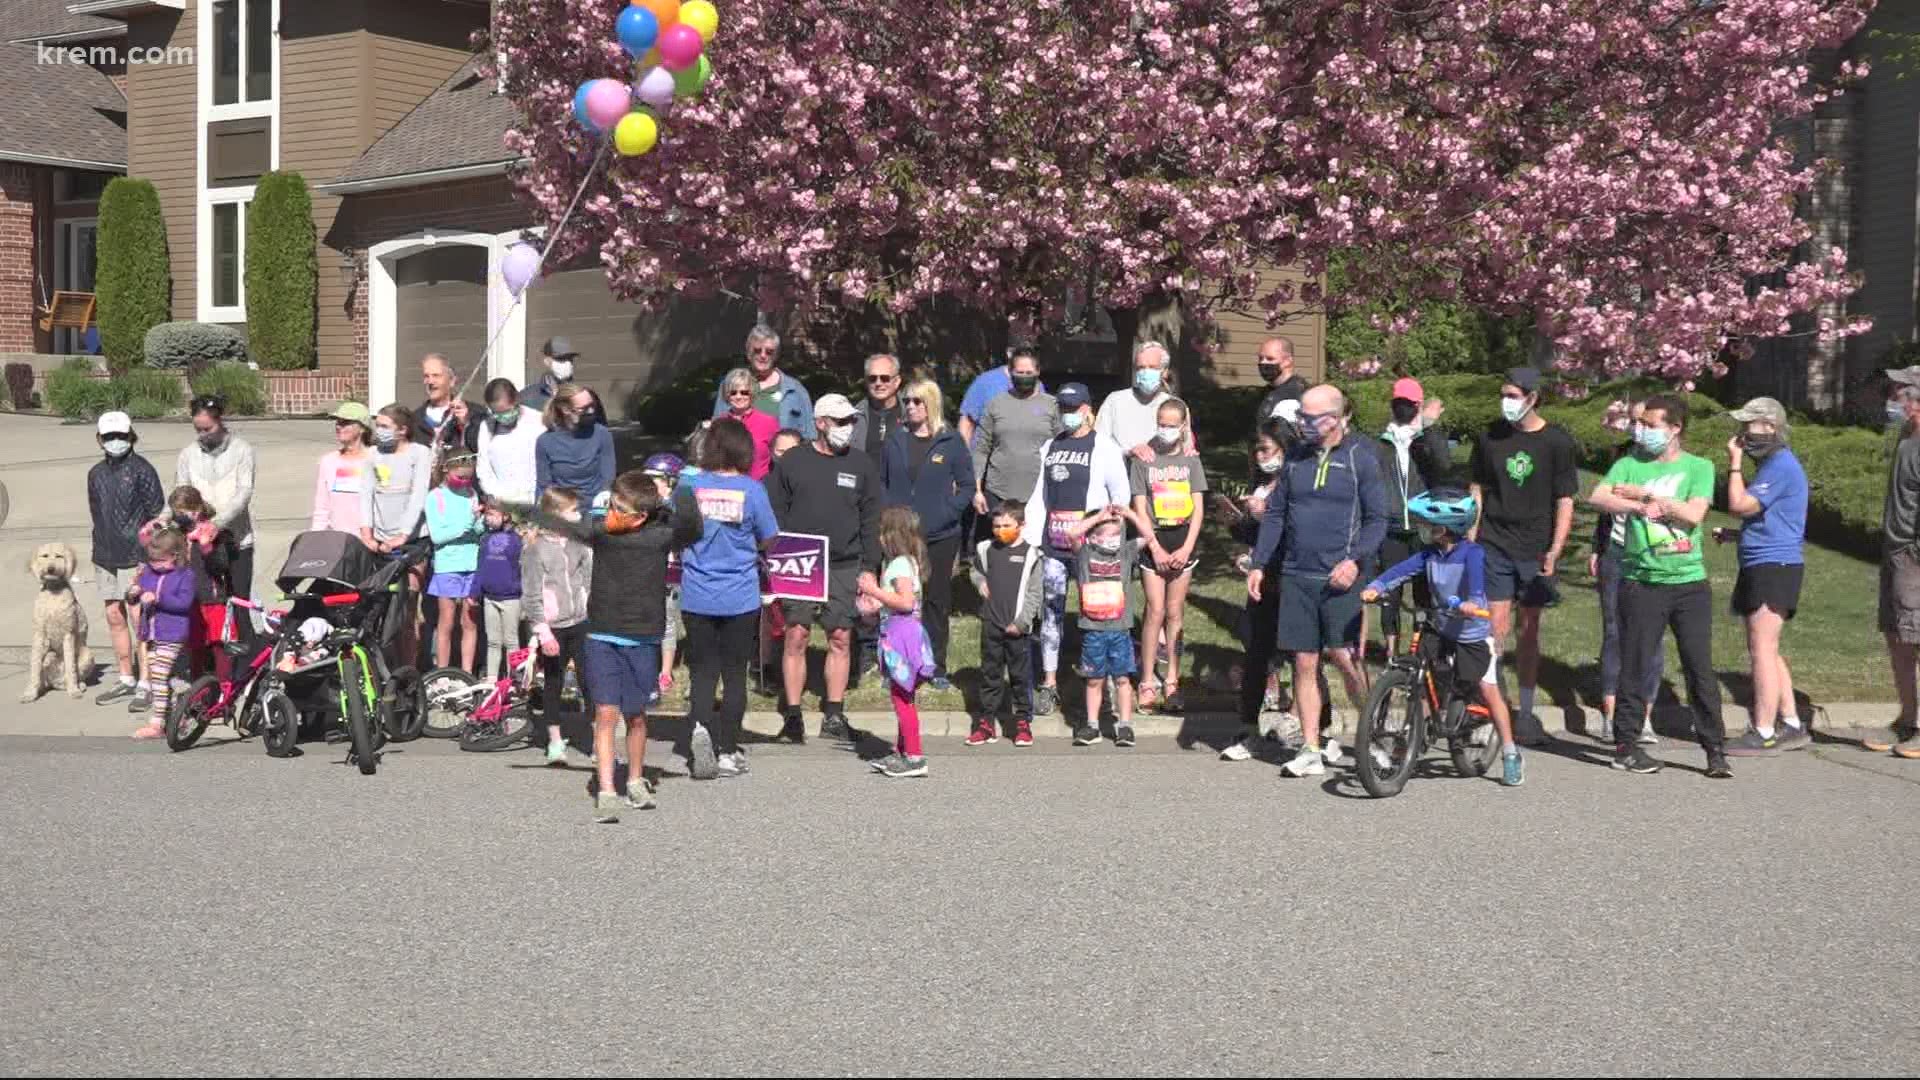 Bloomsday was again held virtually in 2021 due to the COVID-19 pandemic, but that didn't stop one South Hill neighborhood from celebrating together.